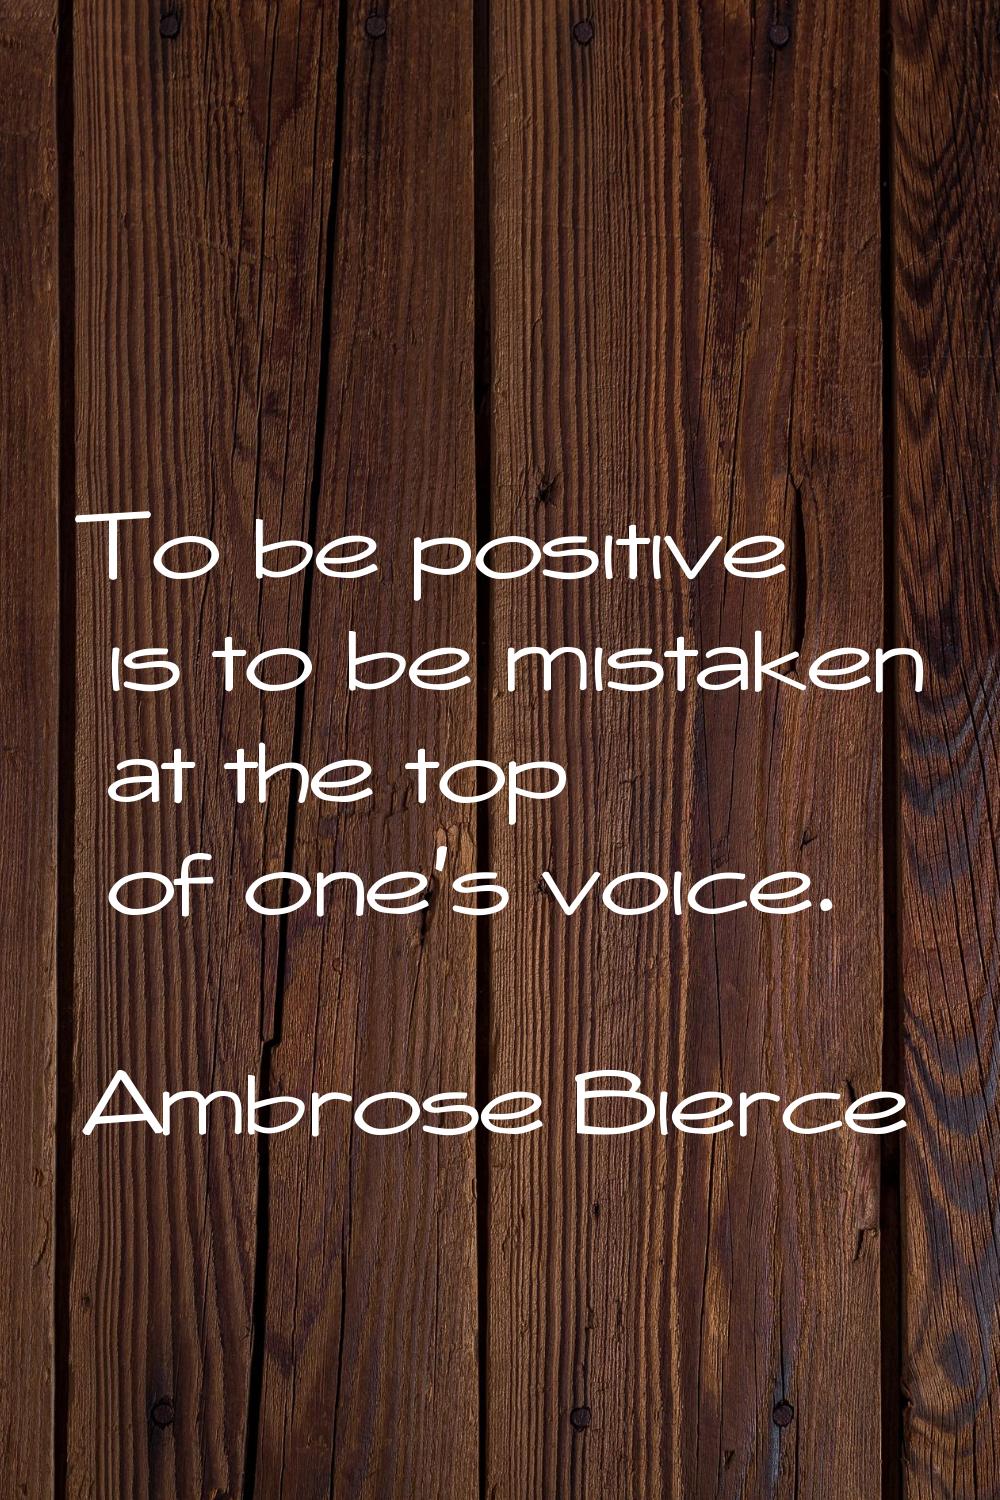 To be positive is to be mistaken at the top of one's voice.